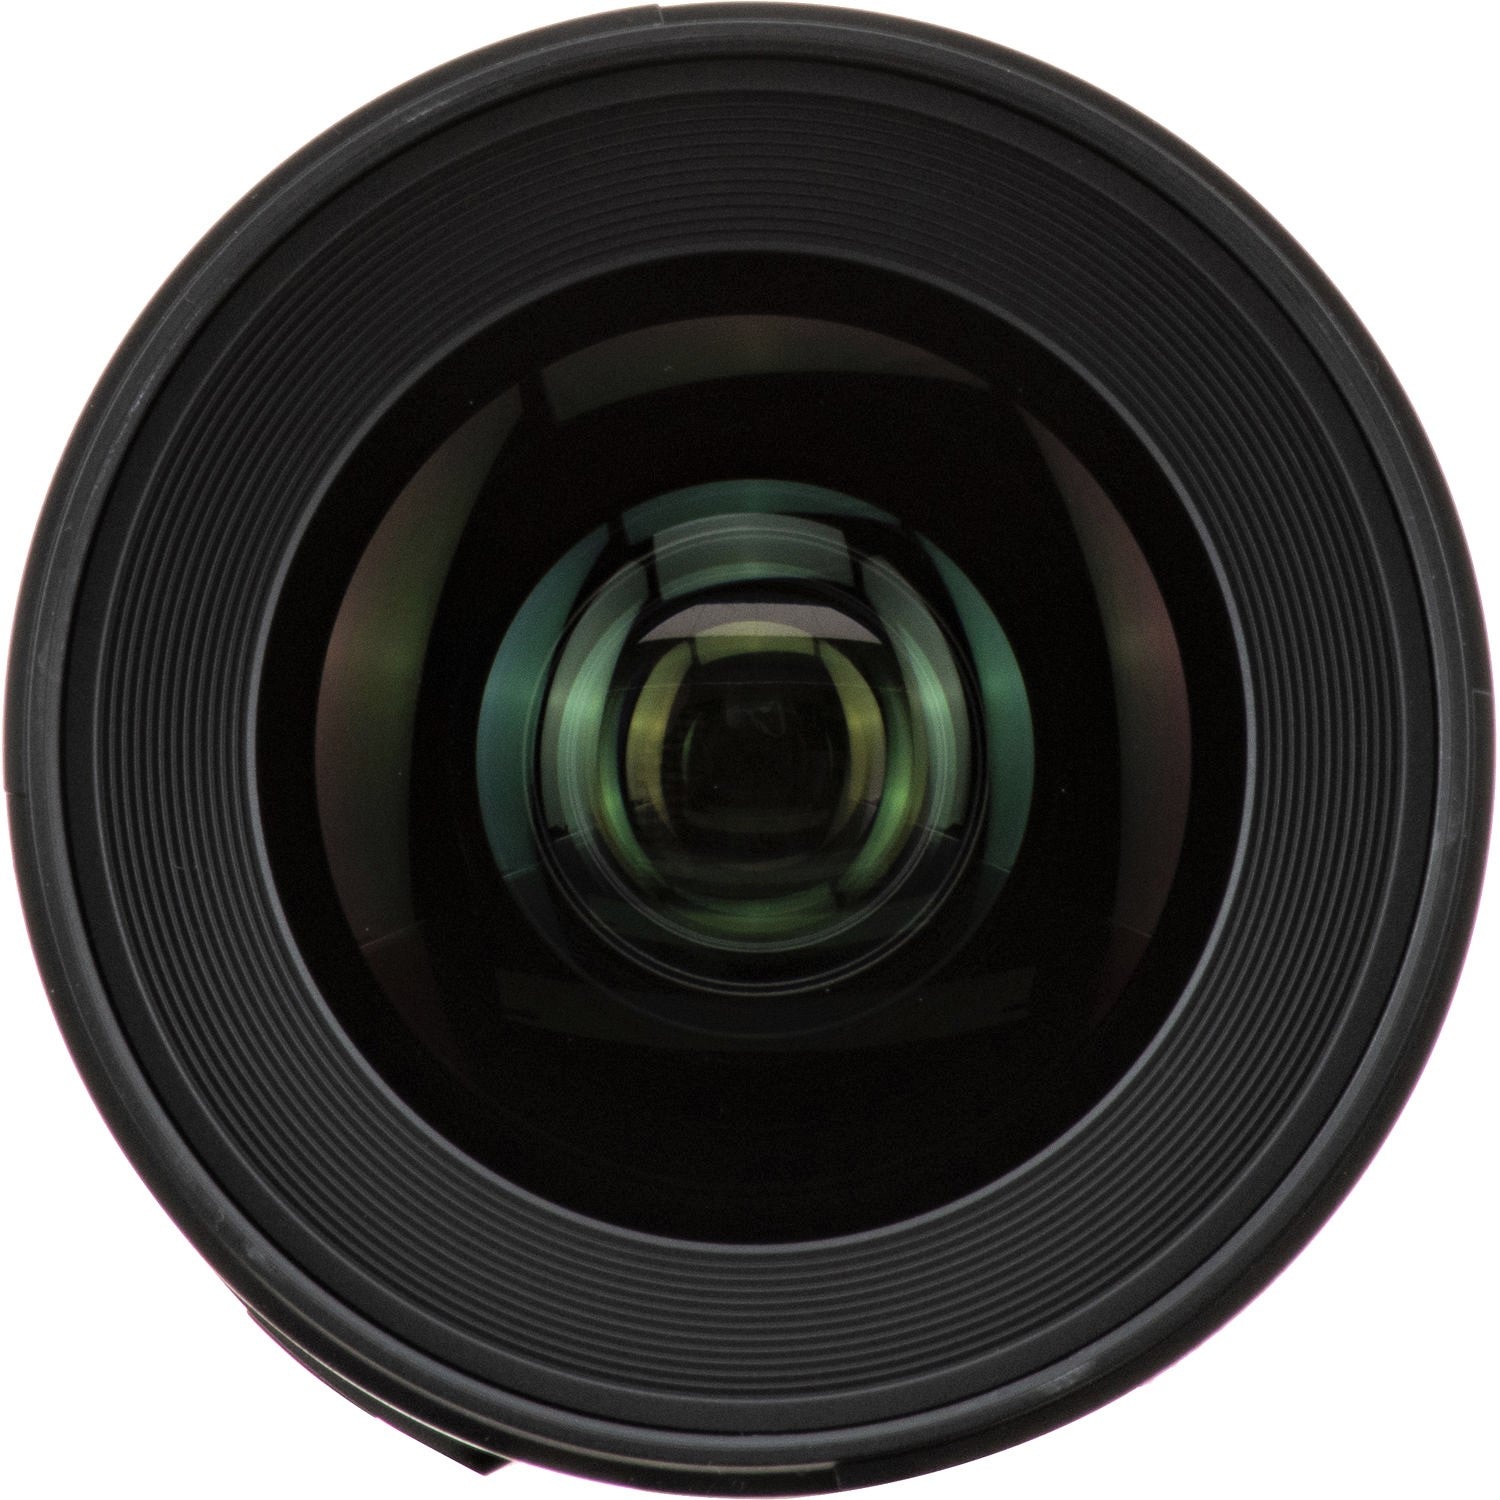 Sigma 28mm F1.4 DG HSM Art Lens for Canon EF in a Front Close-Up View